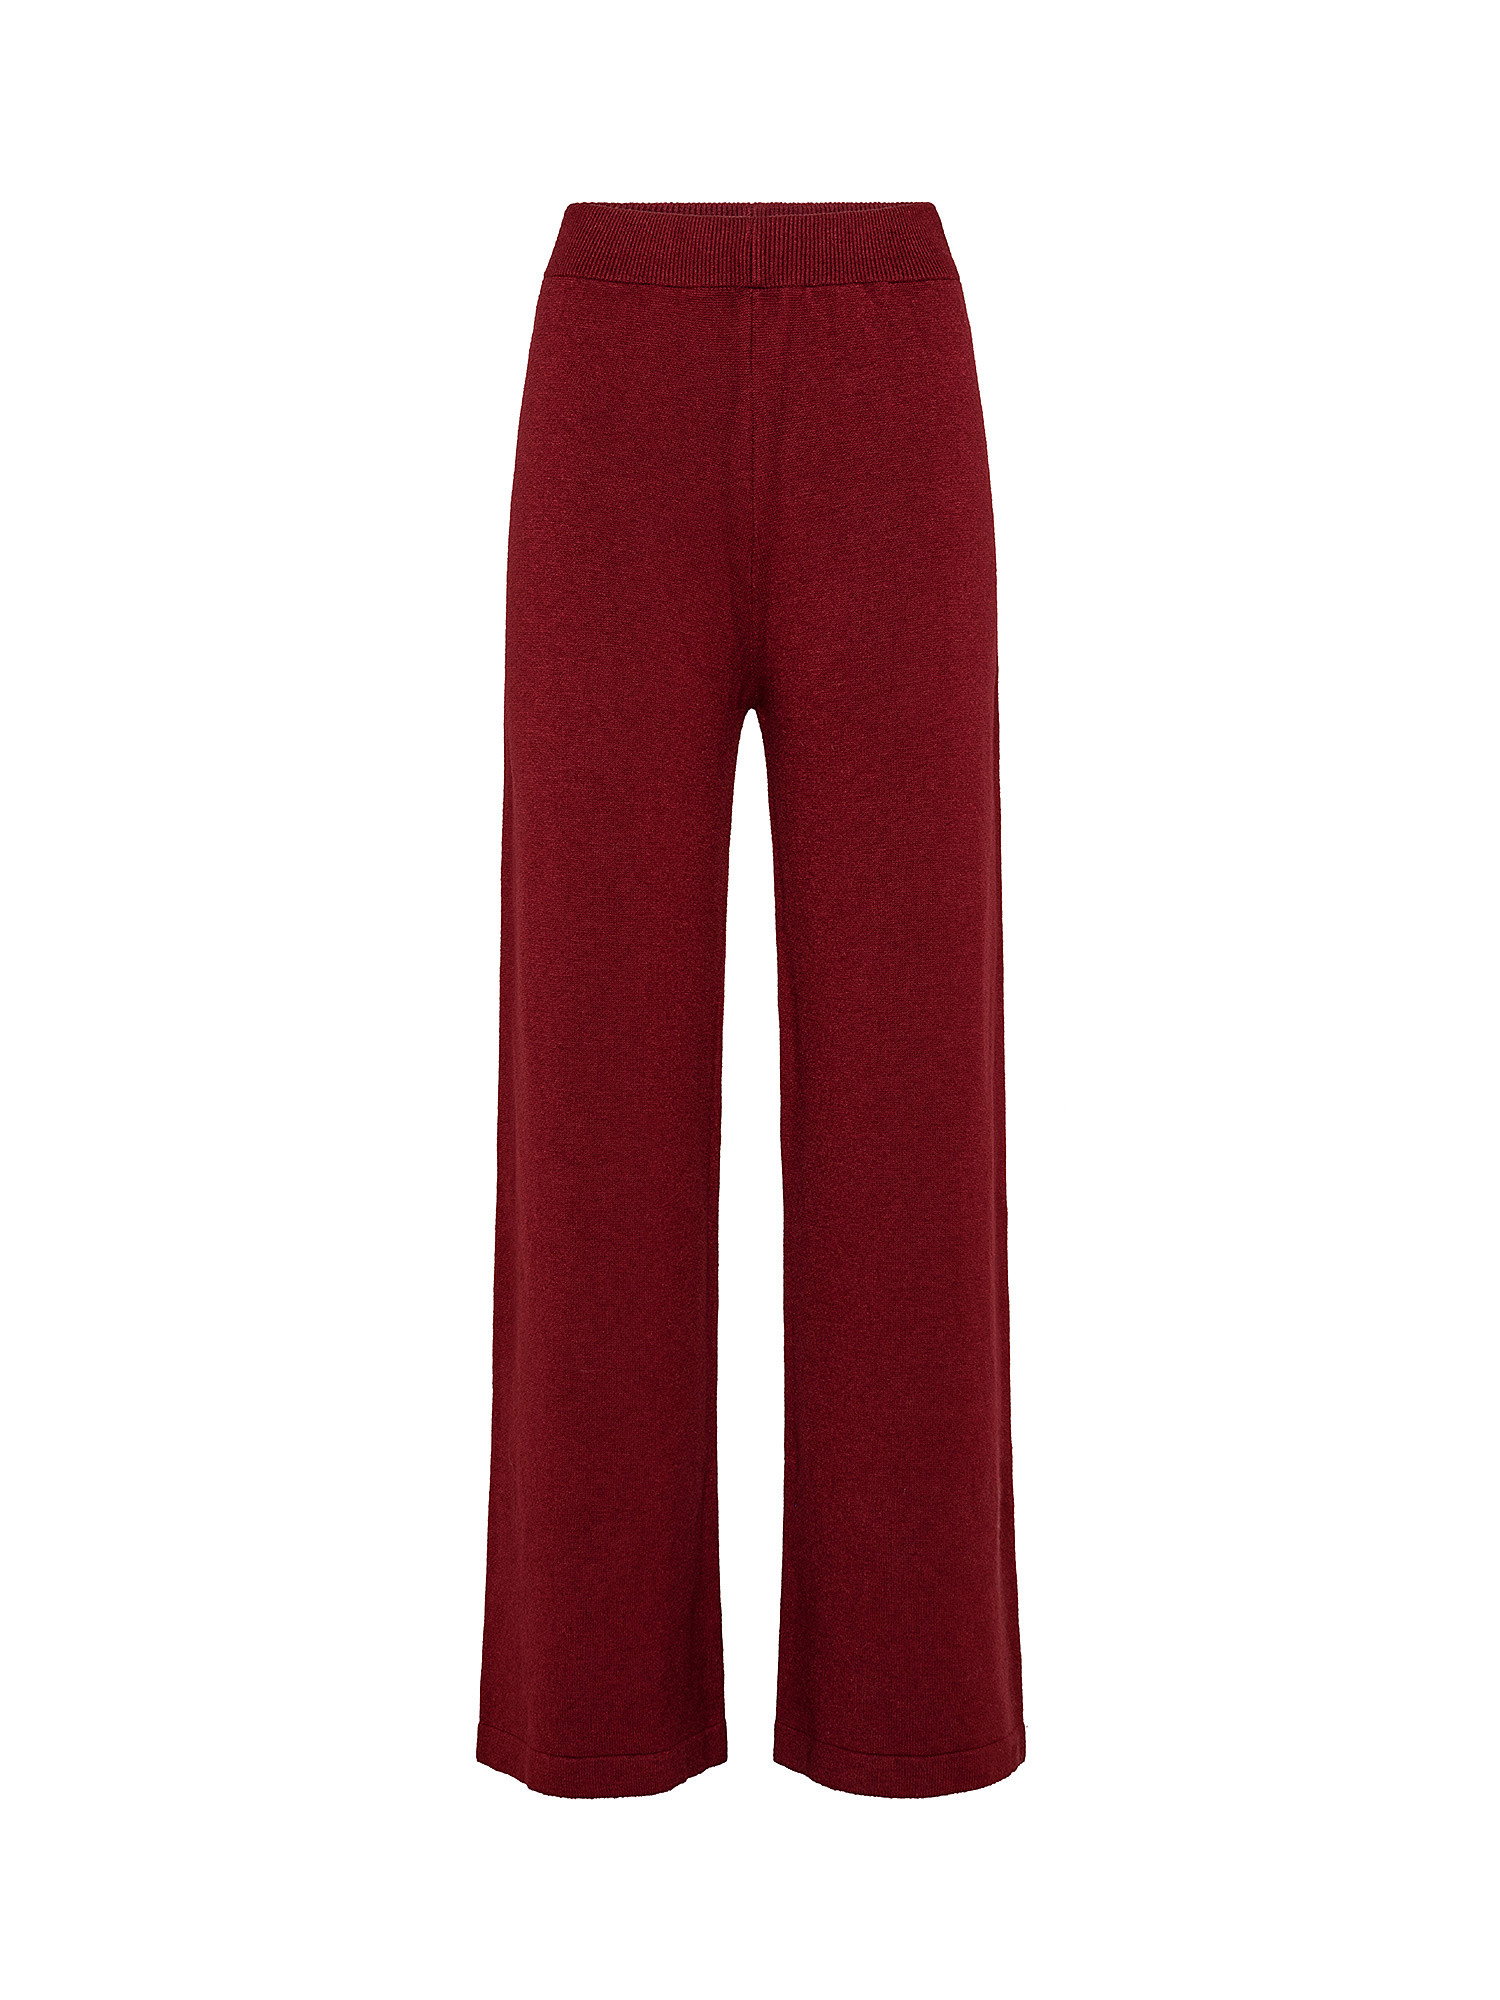 Wide leg knitted trousers, Dark Red, large image number 0